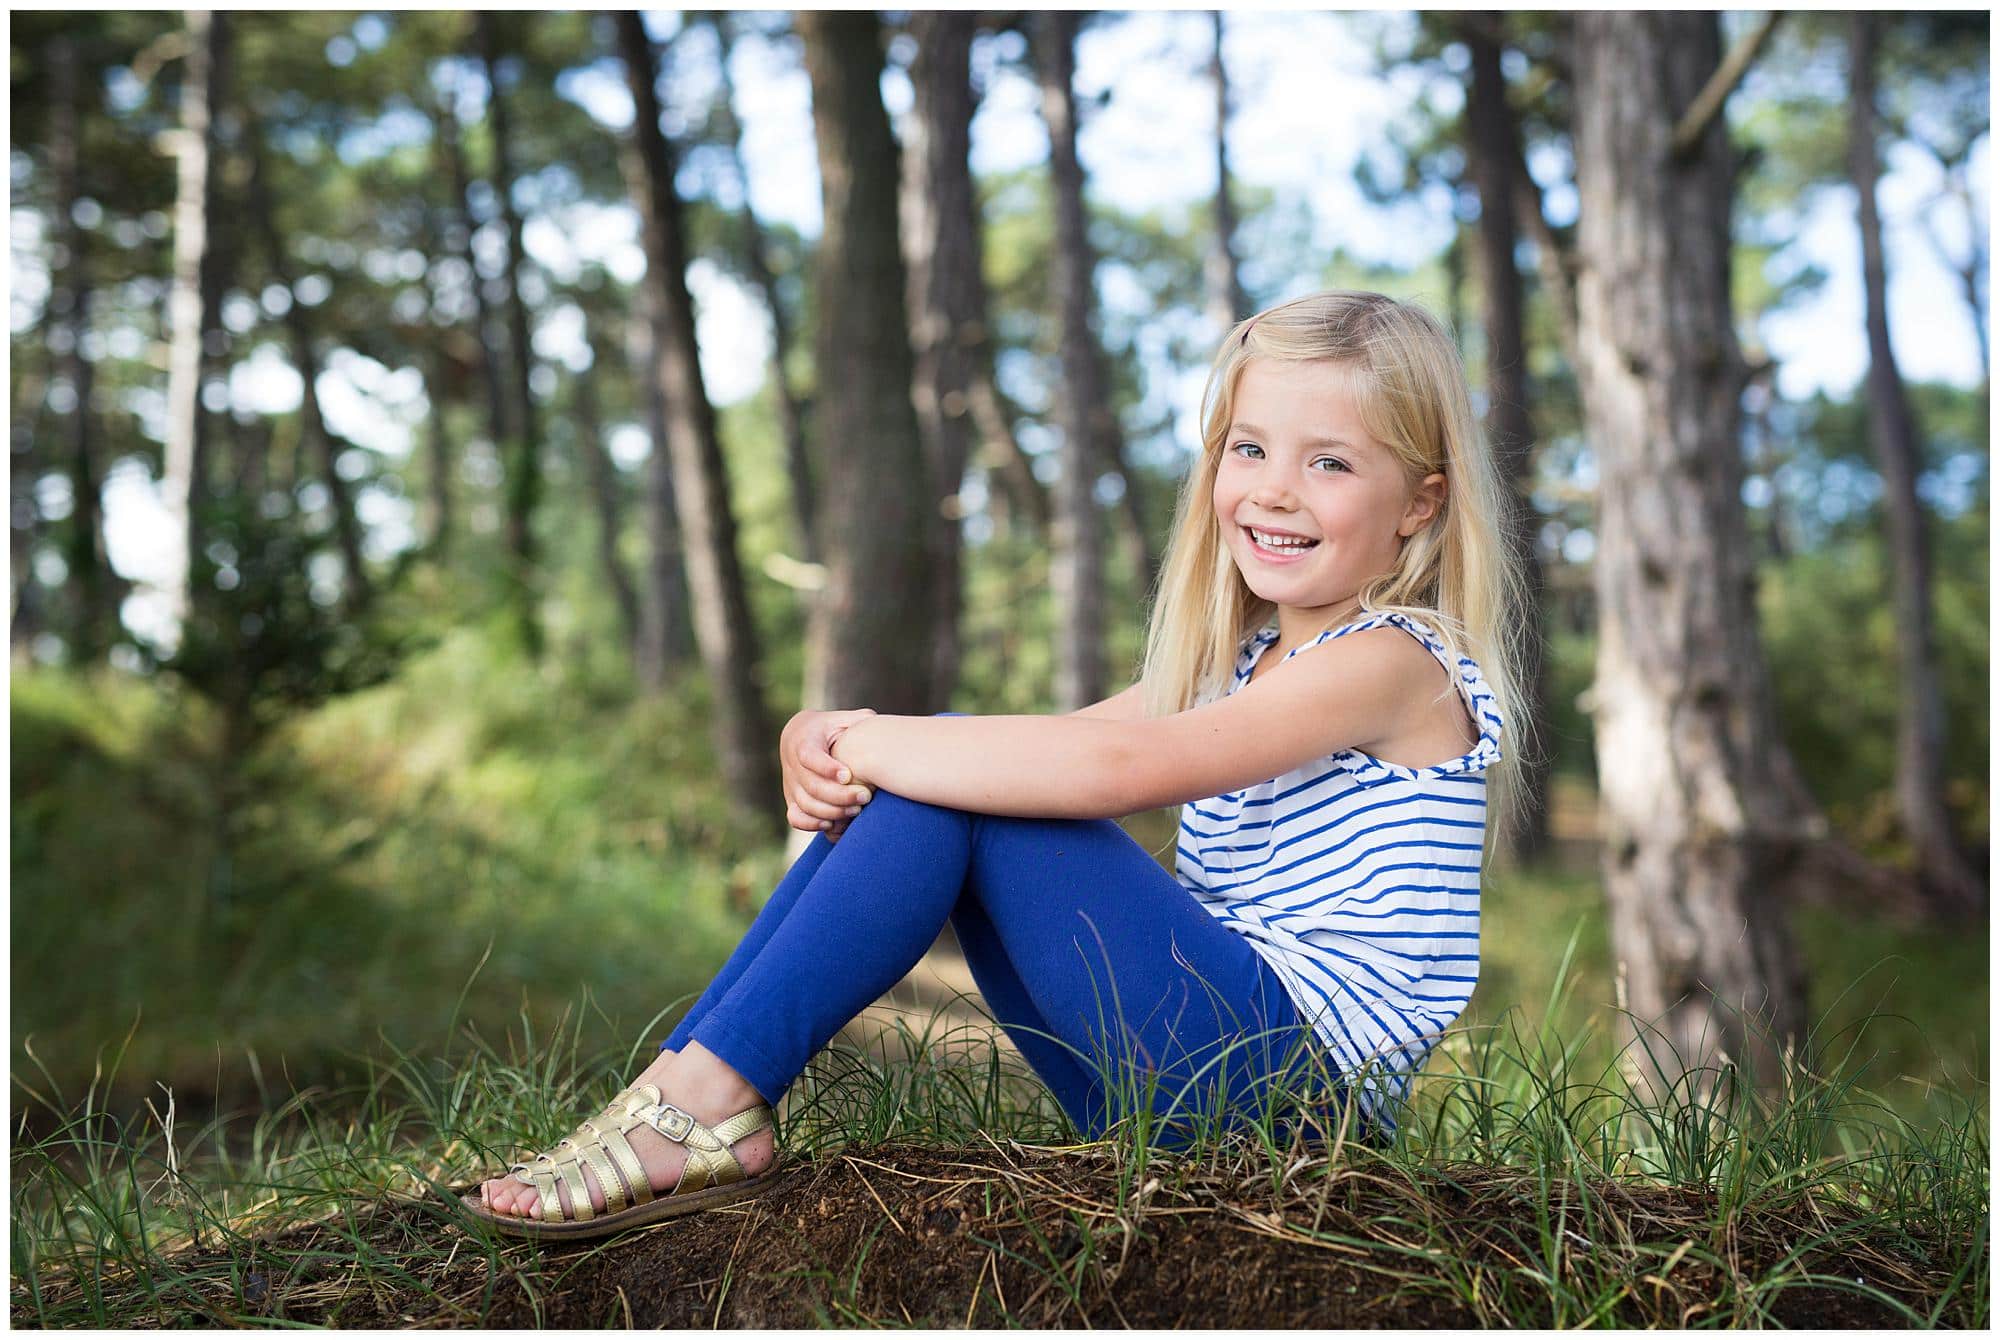 Little girl in blue and white striped top sitting in woods in Suffolk and smiling